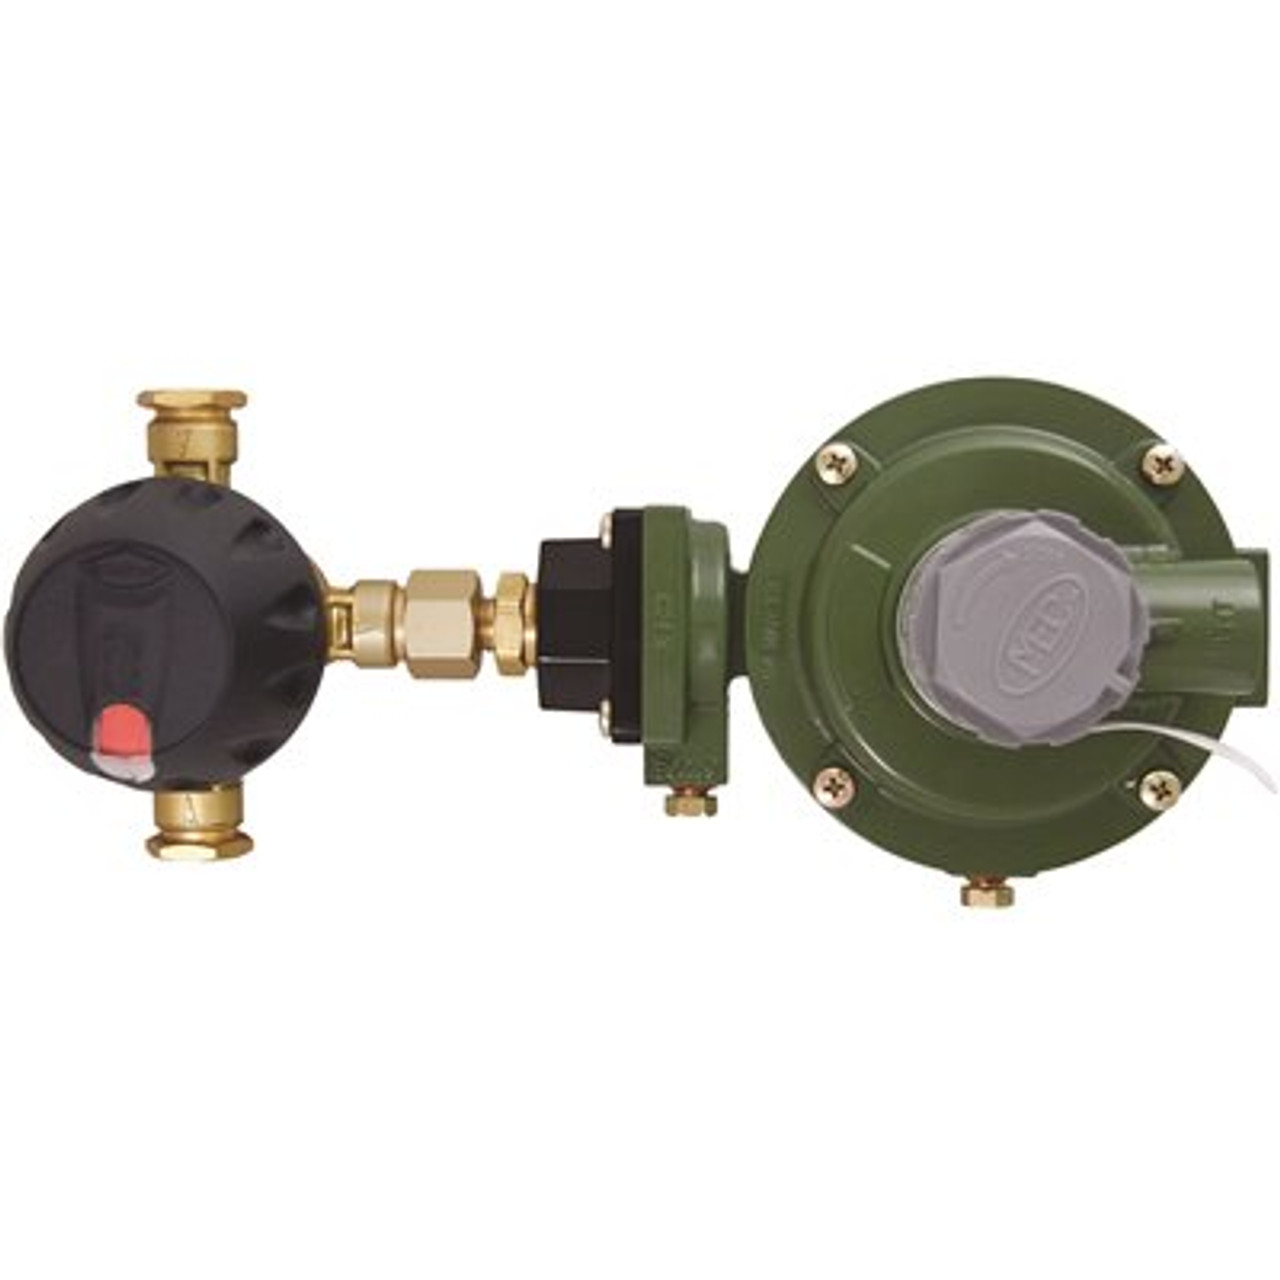 MEC 1/4 in. Inlet x 1/2 in. FNPT Outlet - 11 in. WC Outlet Full Size Automatic Changeover Regulator